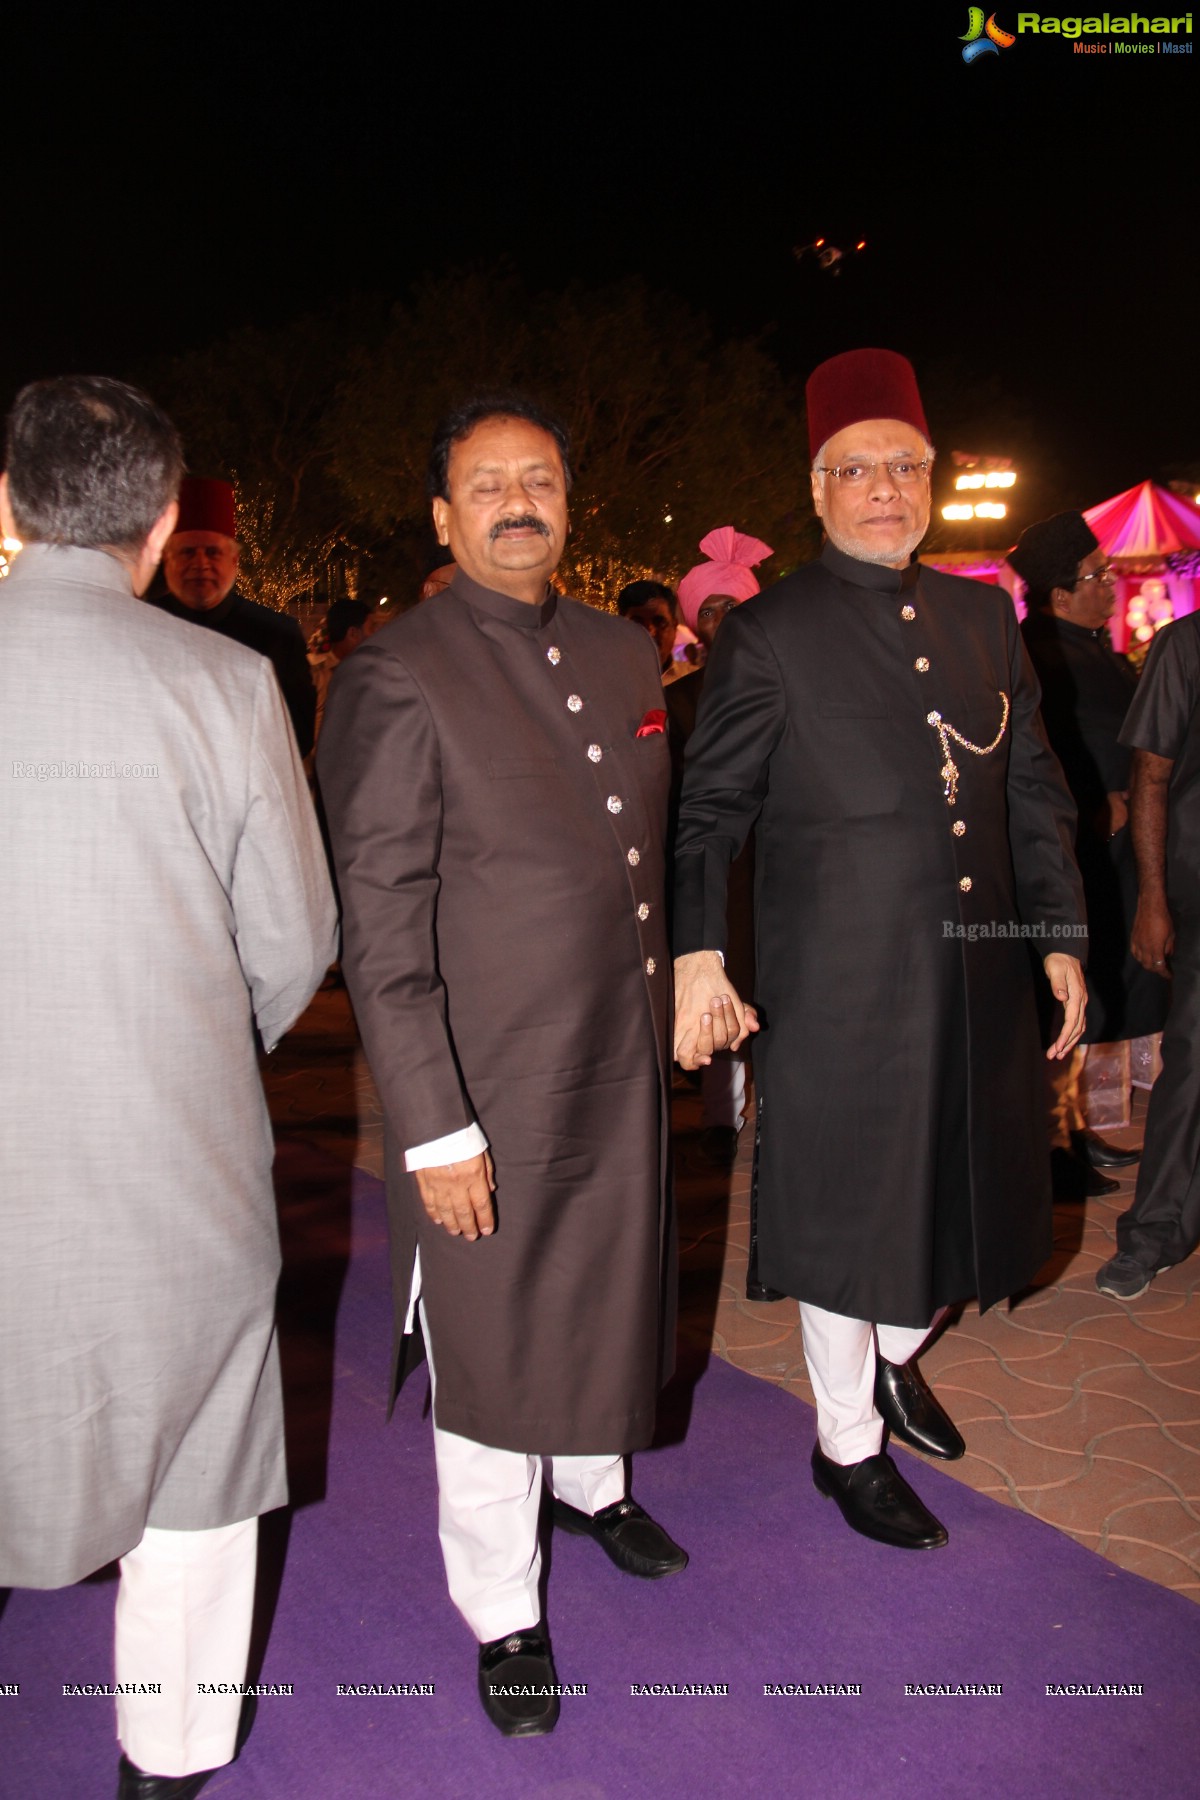 Grand Wedding Ceremony of Bader Alam Khan-Iqra Fatima at Imperial Garden, Hyderabad